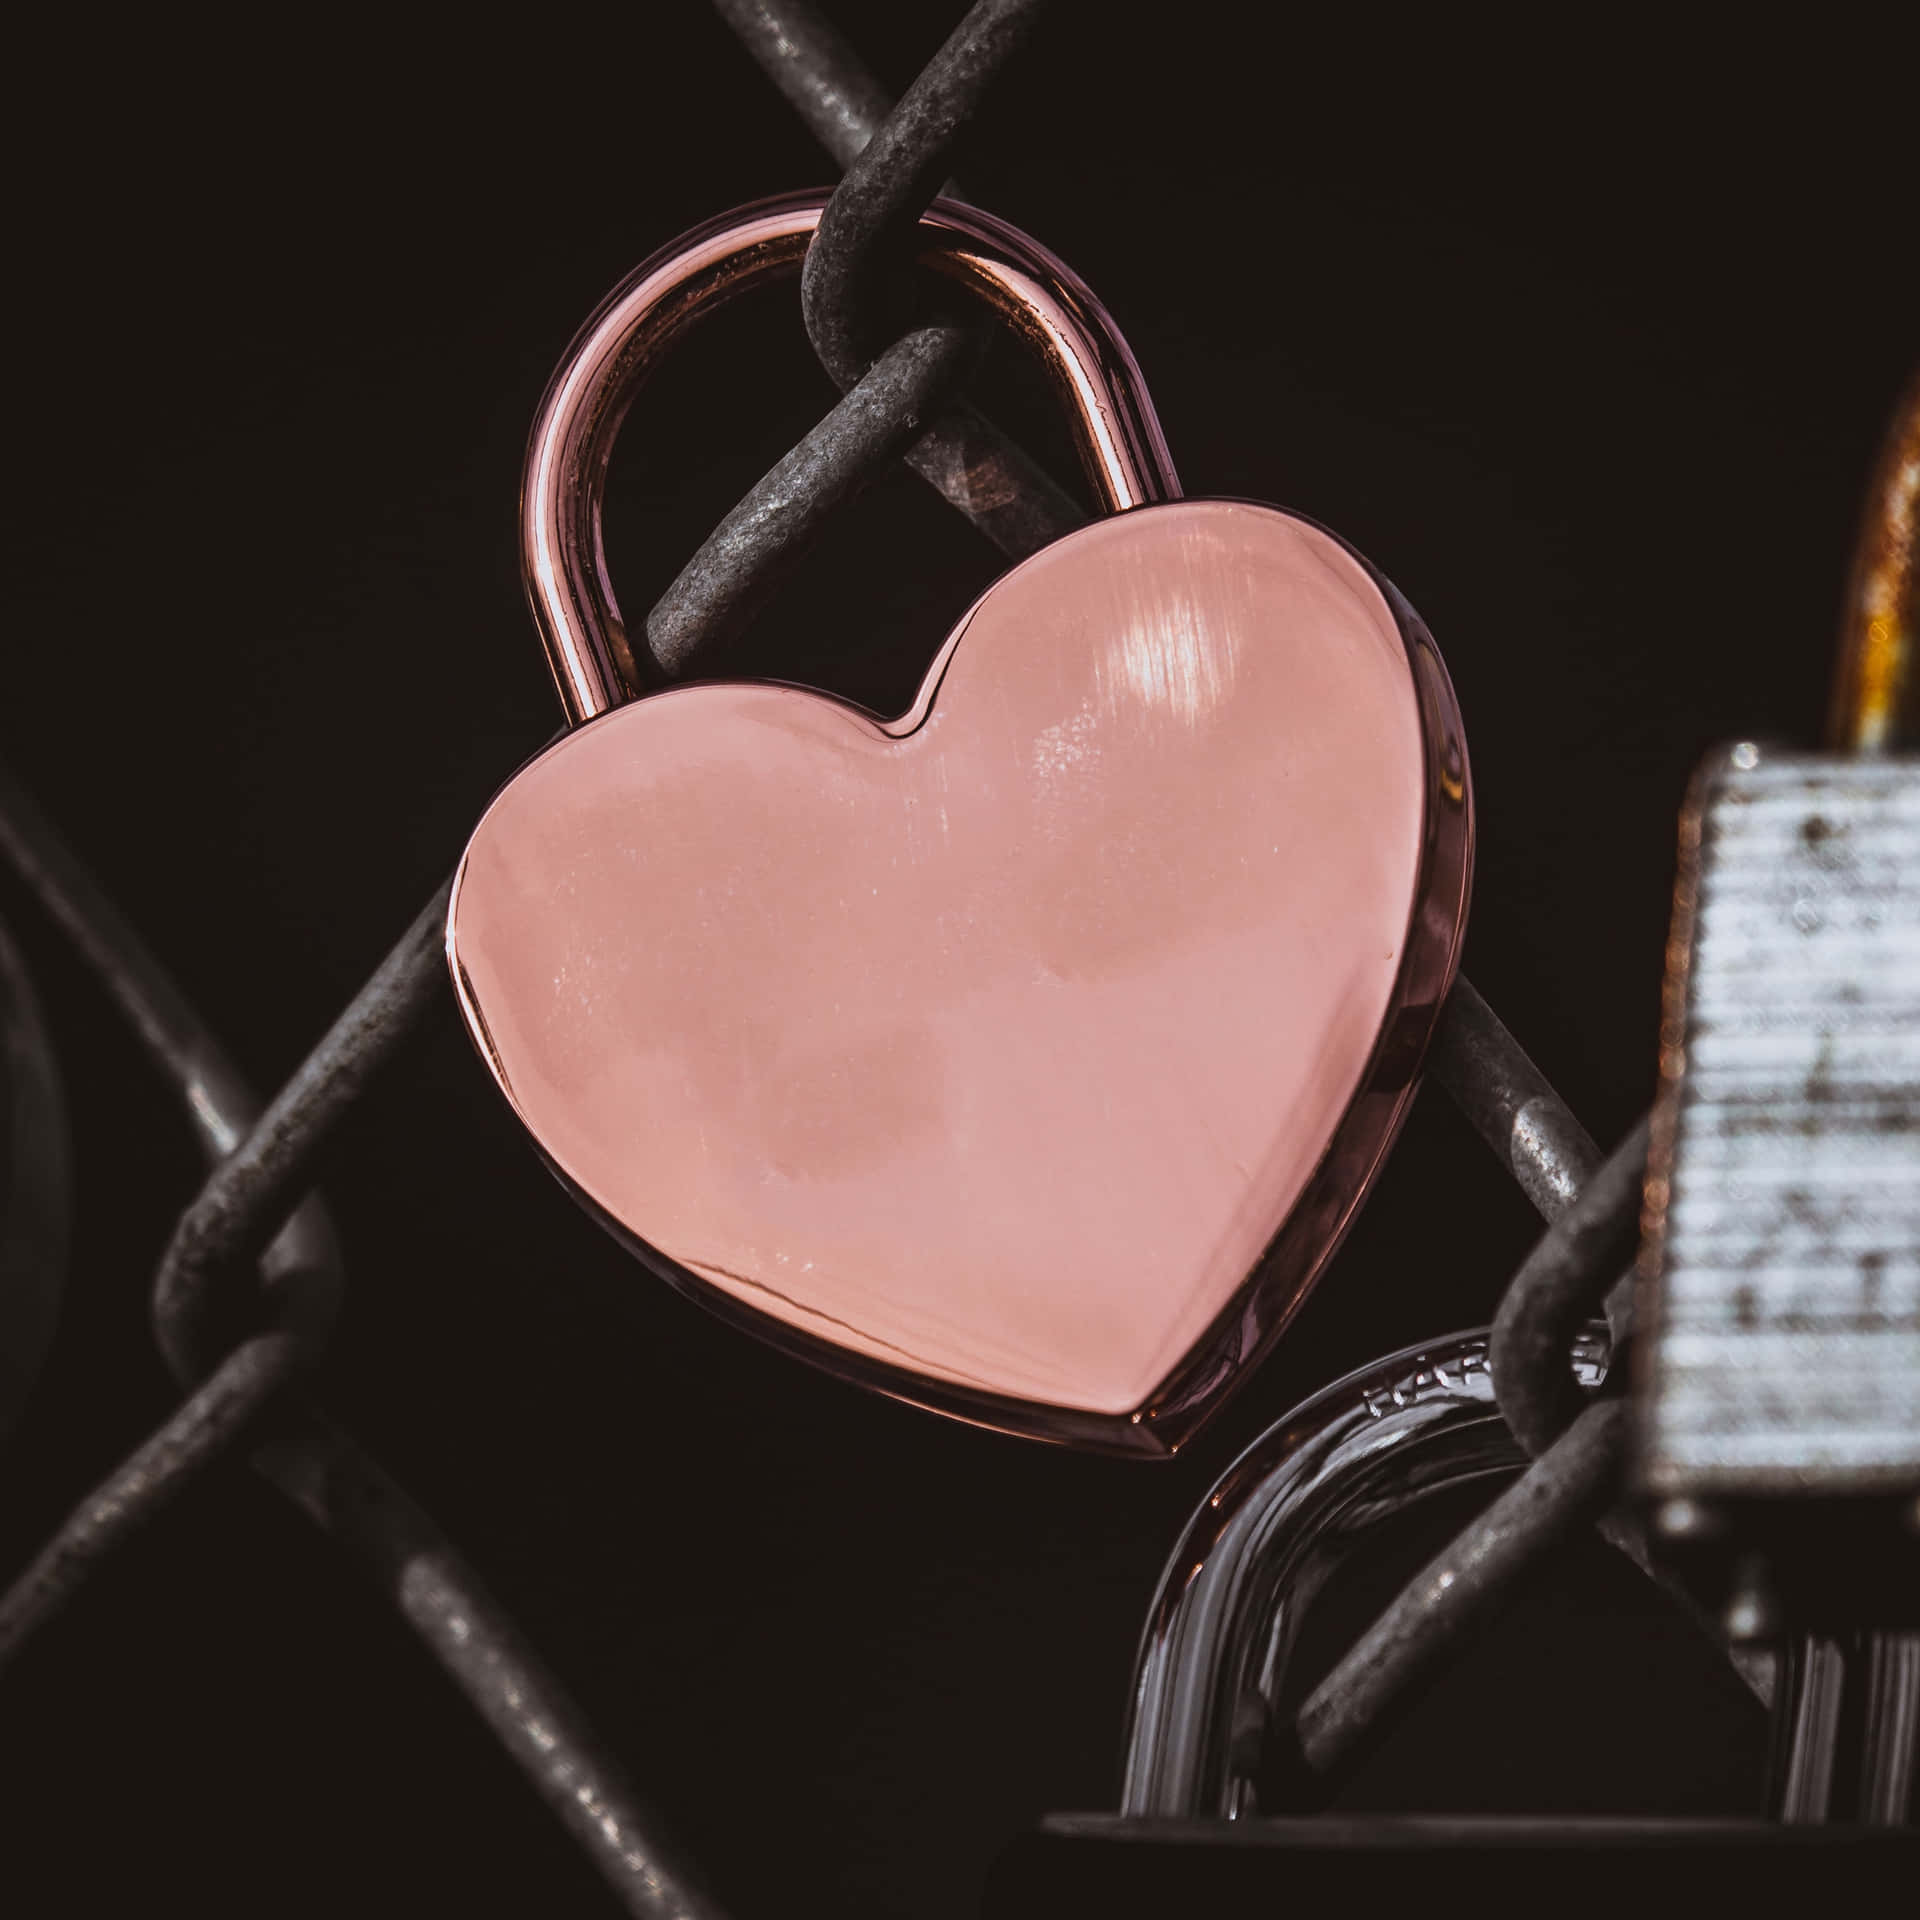 A Heart Shaped Padlock Is Attached To A Chain Link Fence